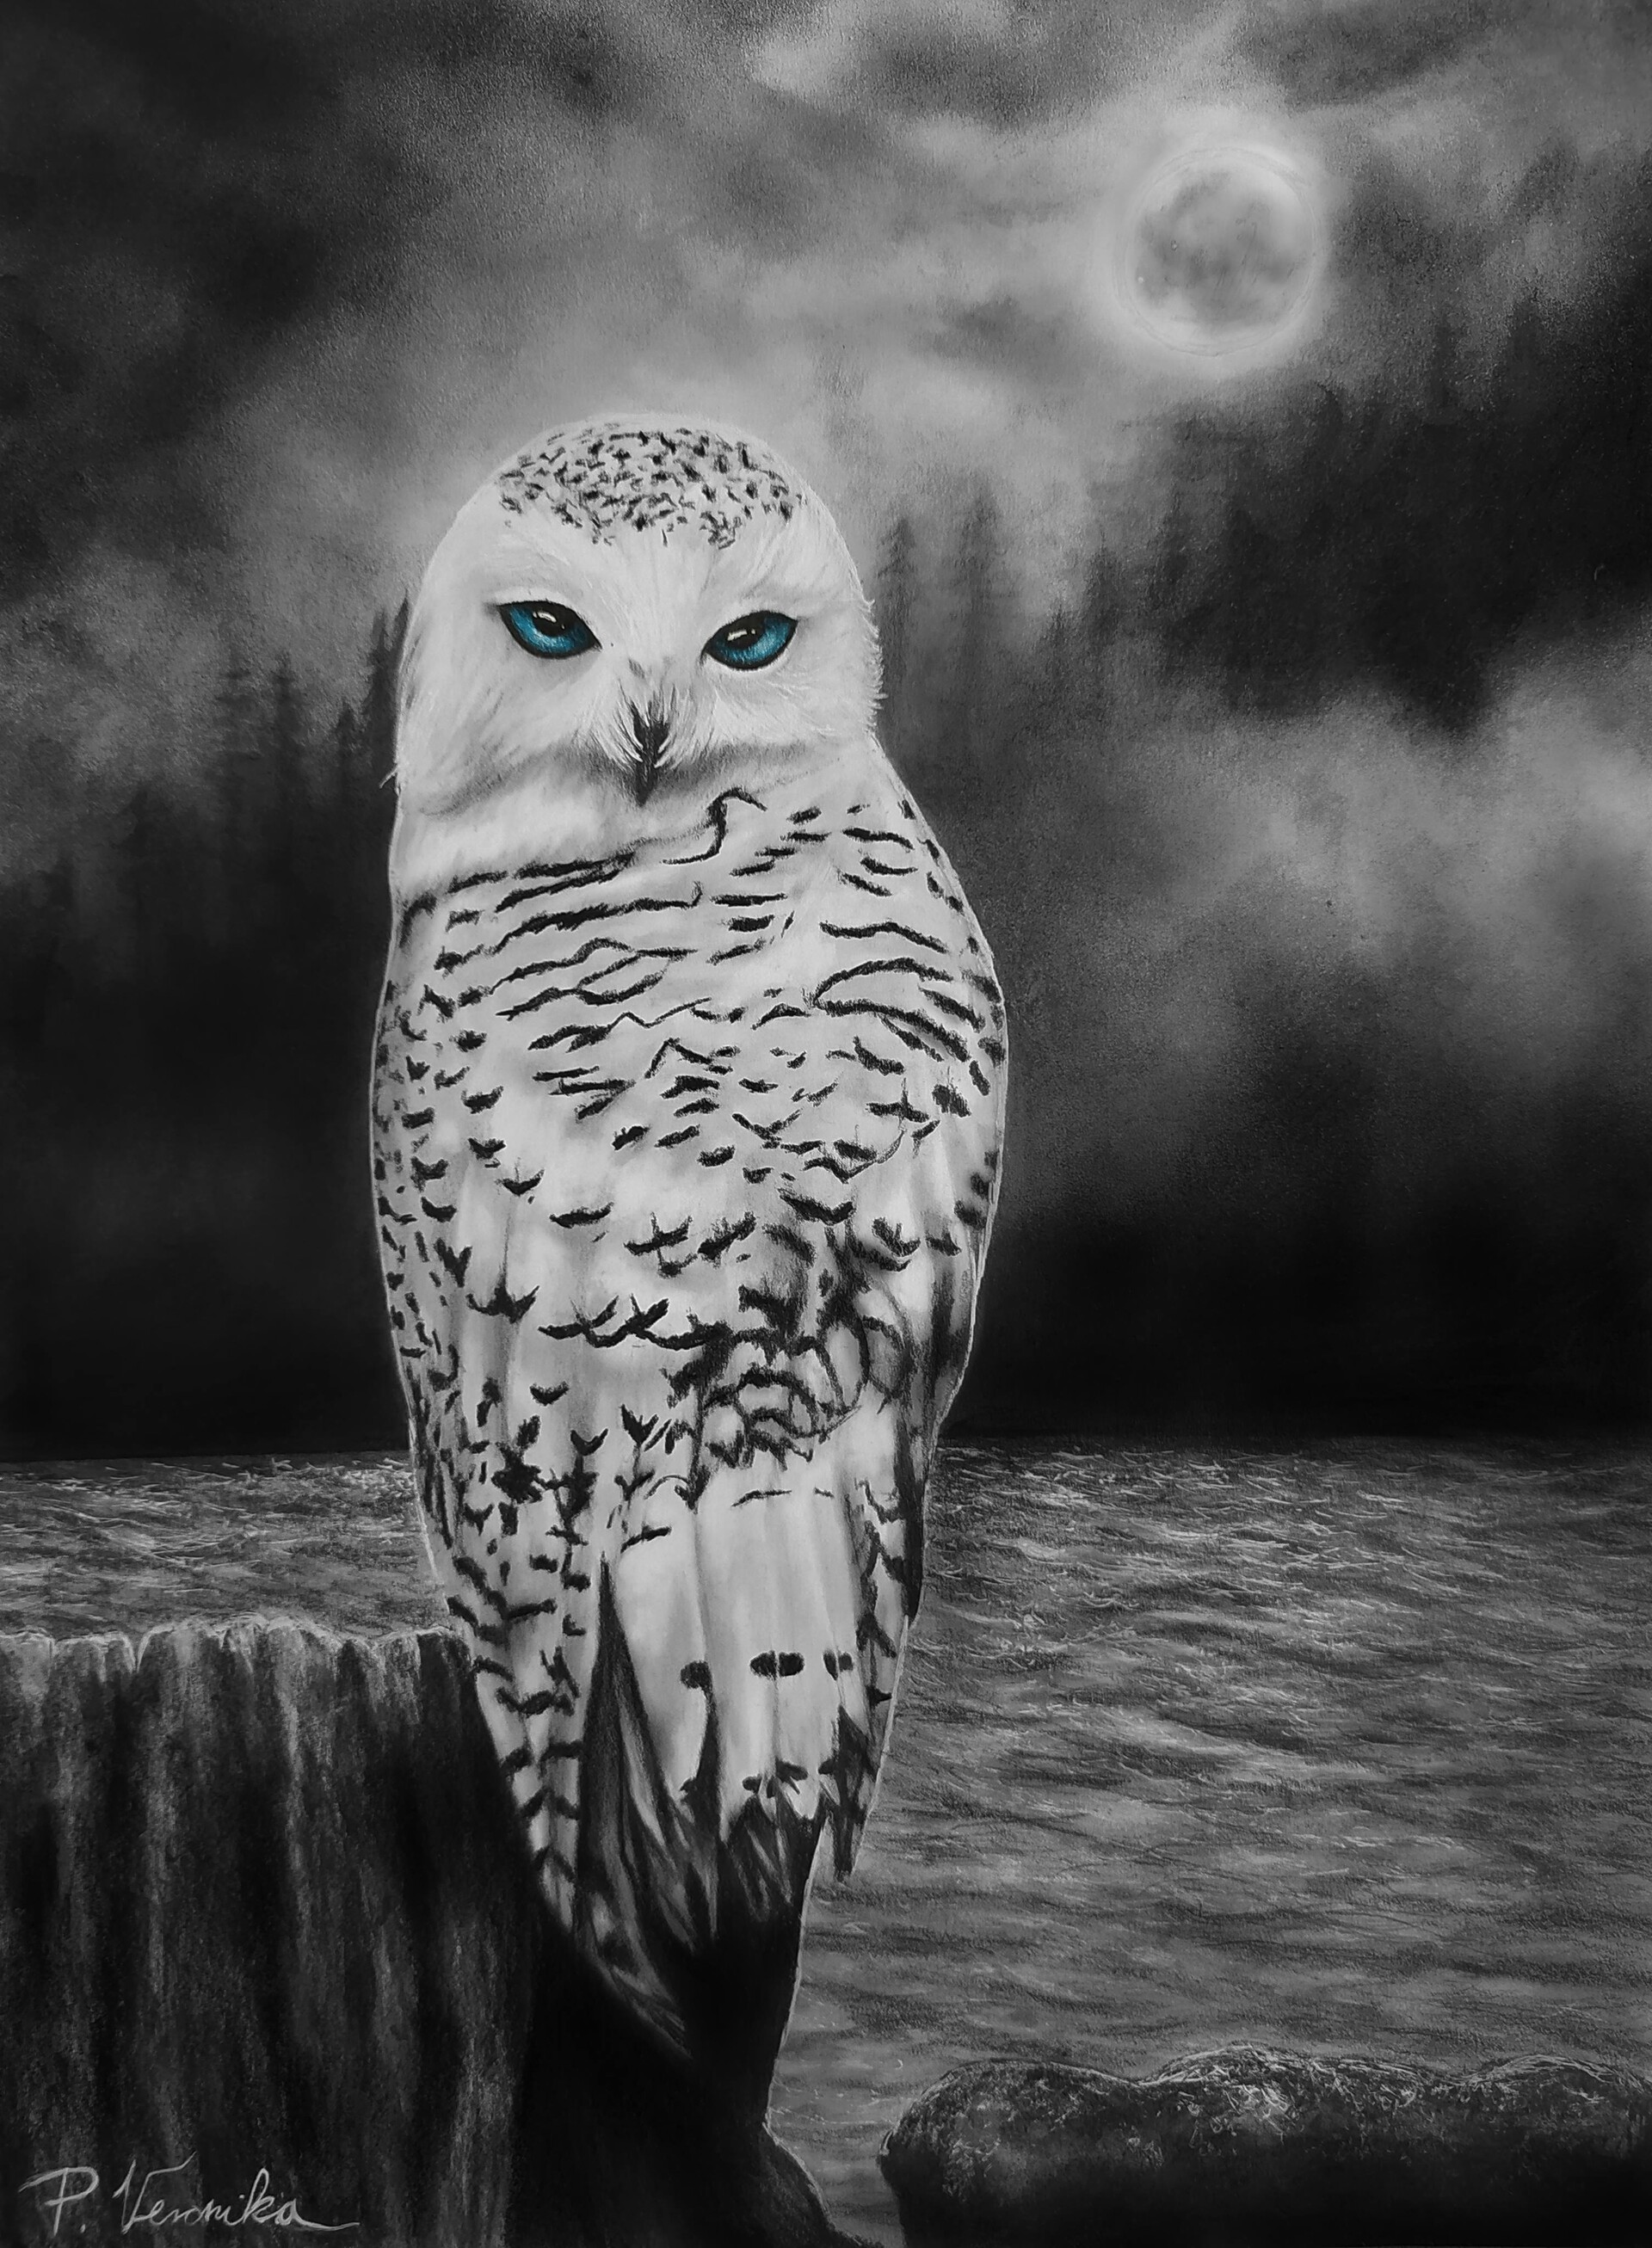 ArtStation - Charcoal drawing of an Owl